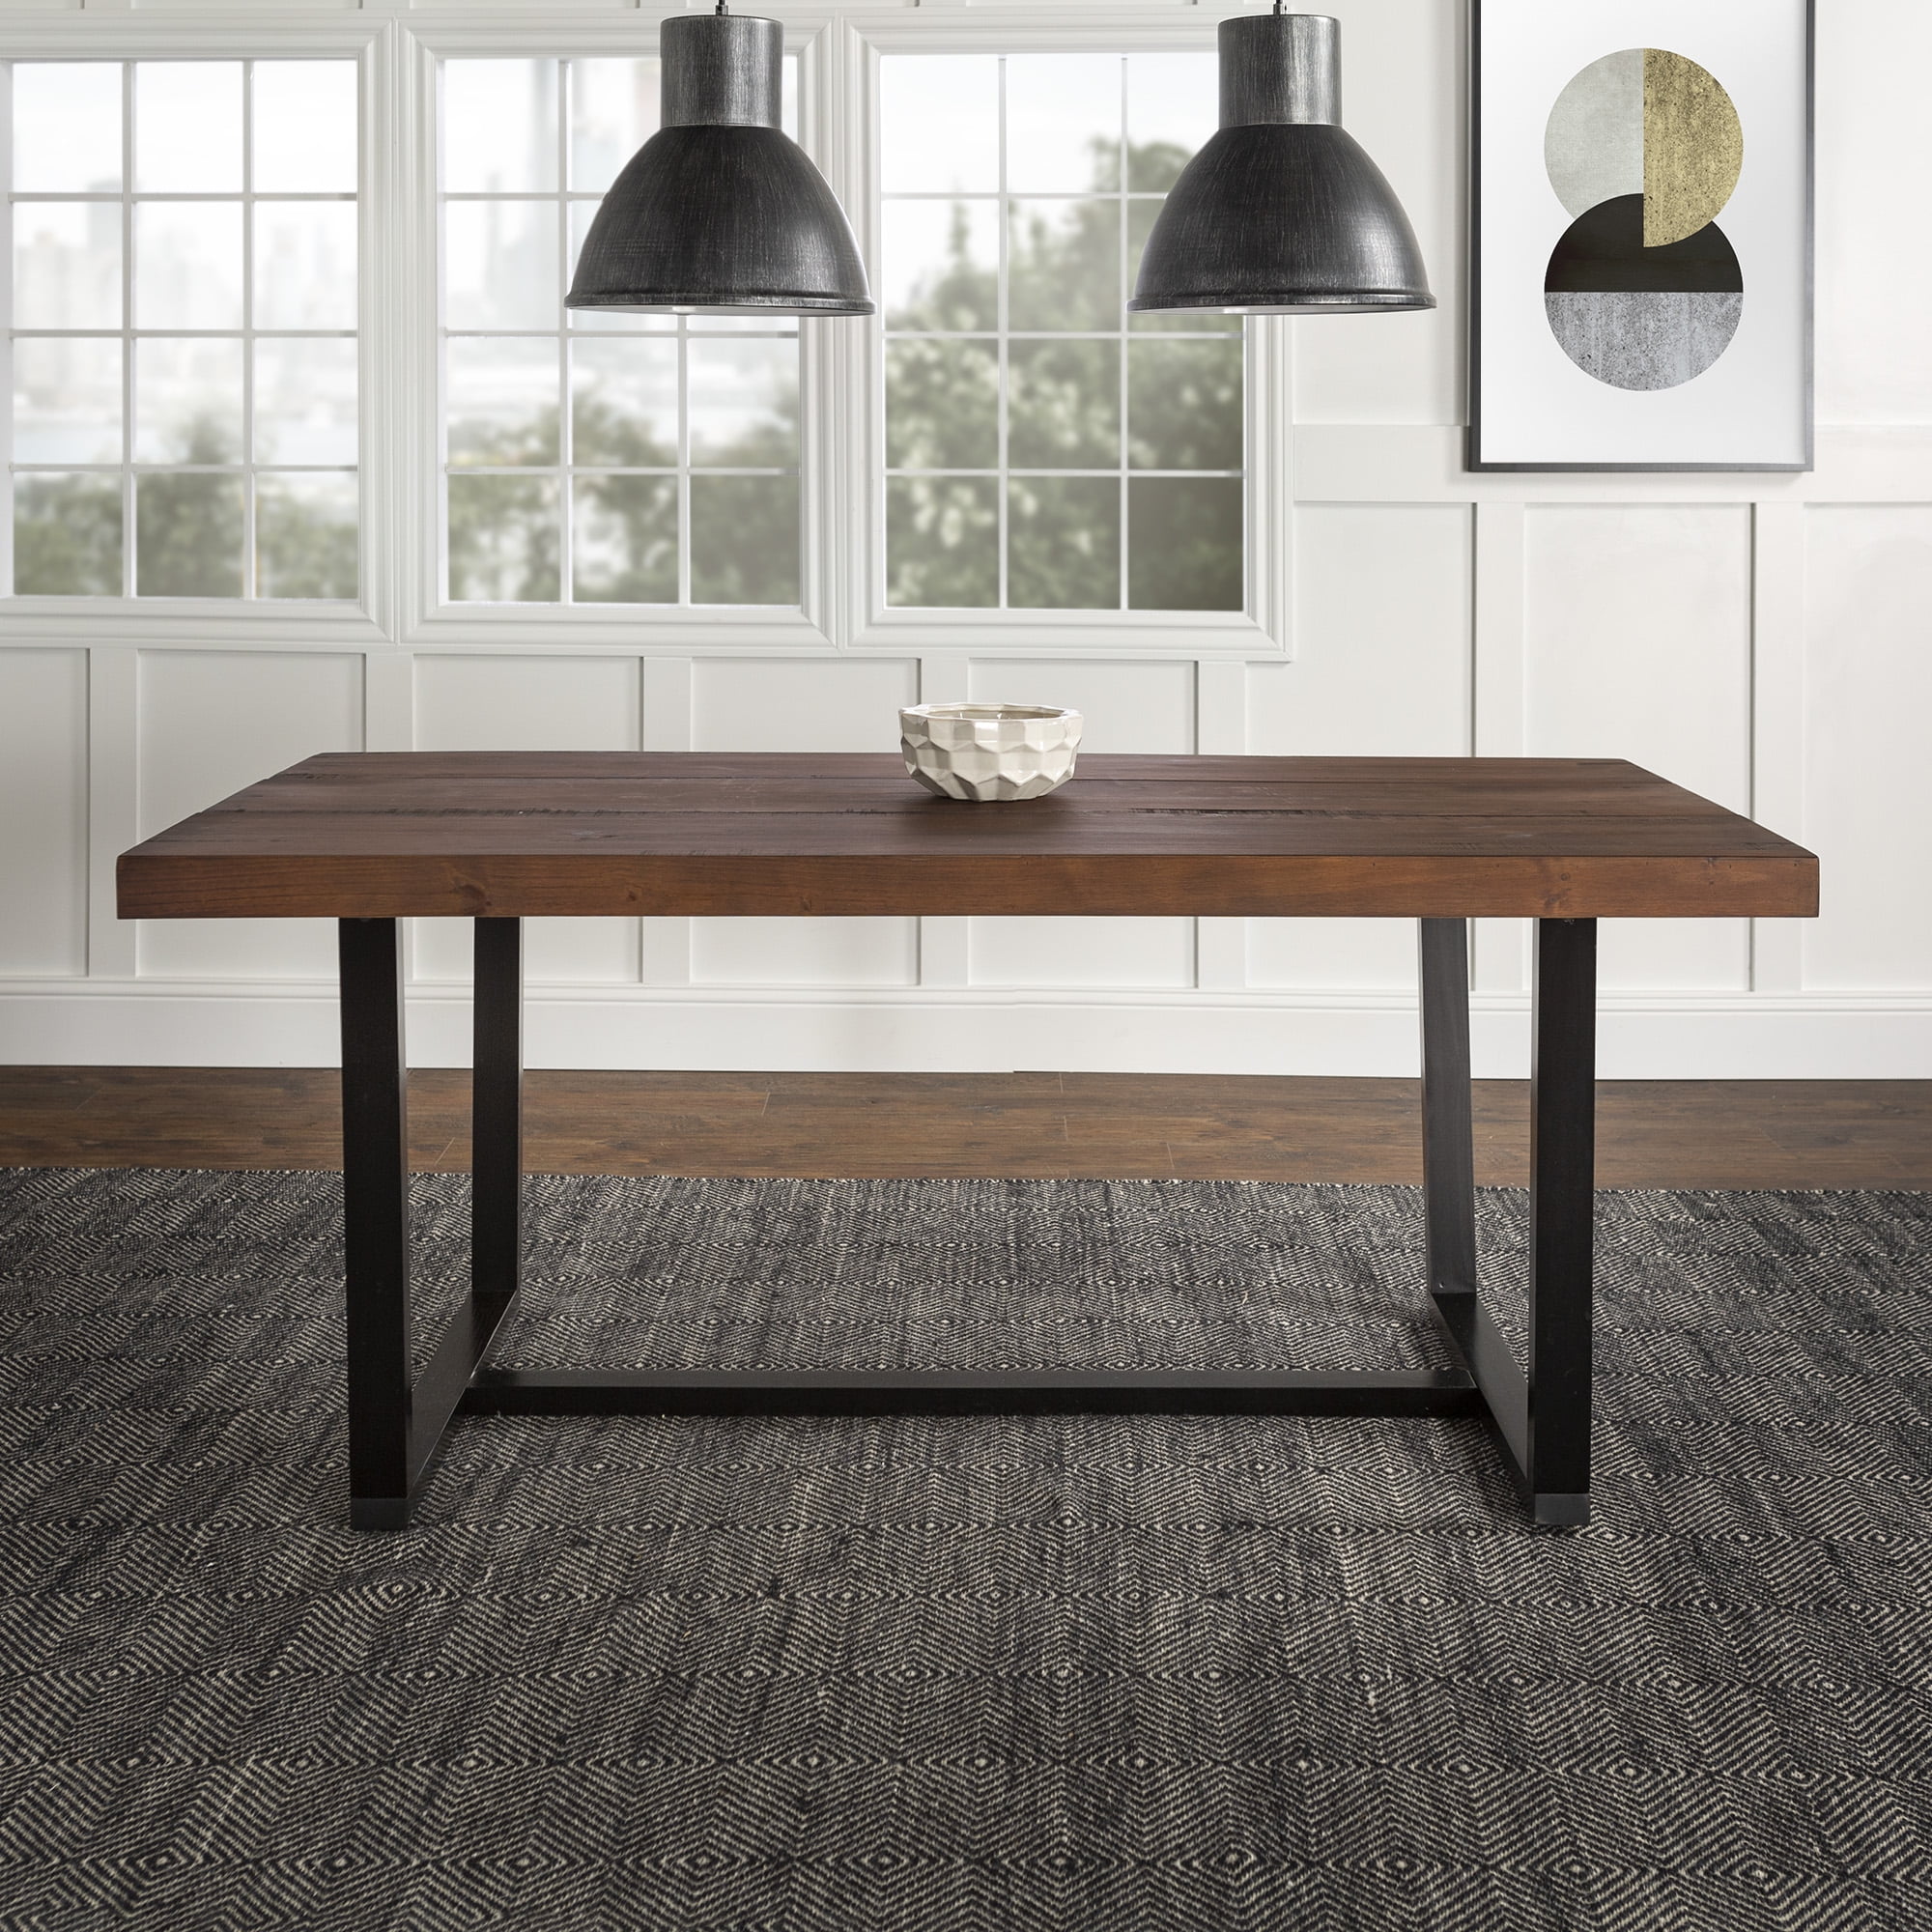 Woven Paths Rustic Farmhouse Solid Wood, Rustic Wooden Dining Tables